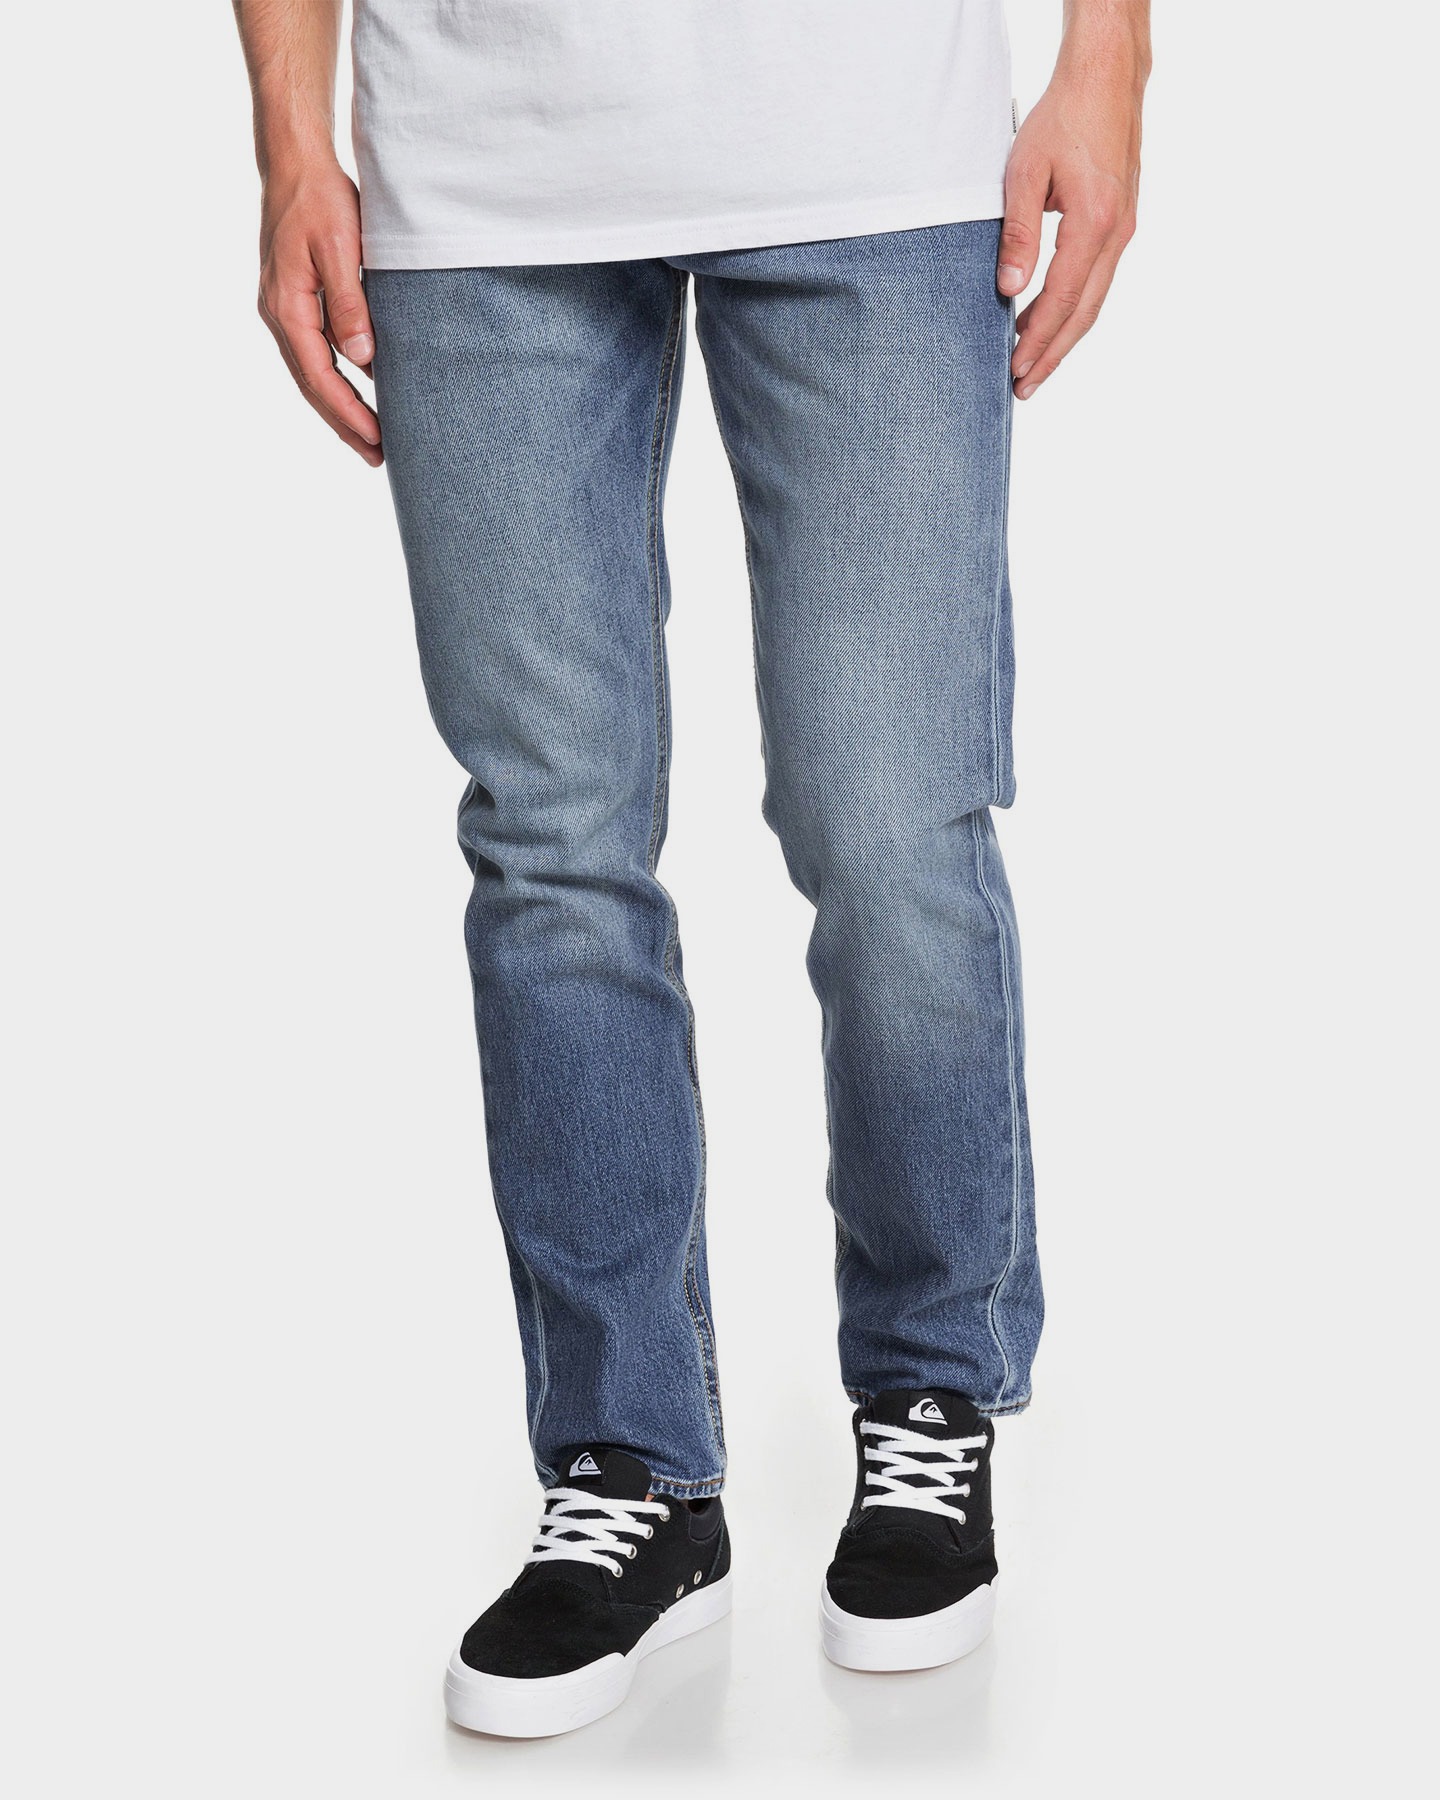 Quiksilver Mens Modern Wave Aged Straight Fit Jeans - Aged | SurfStitch